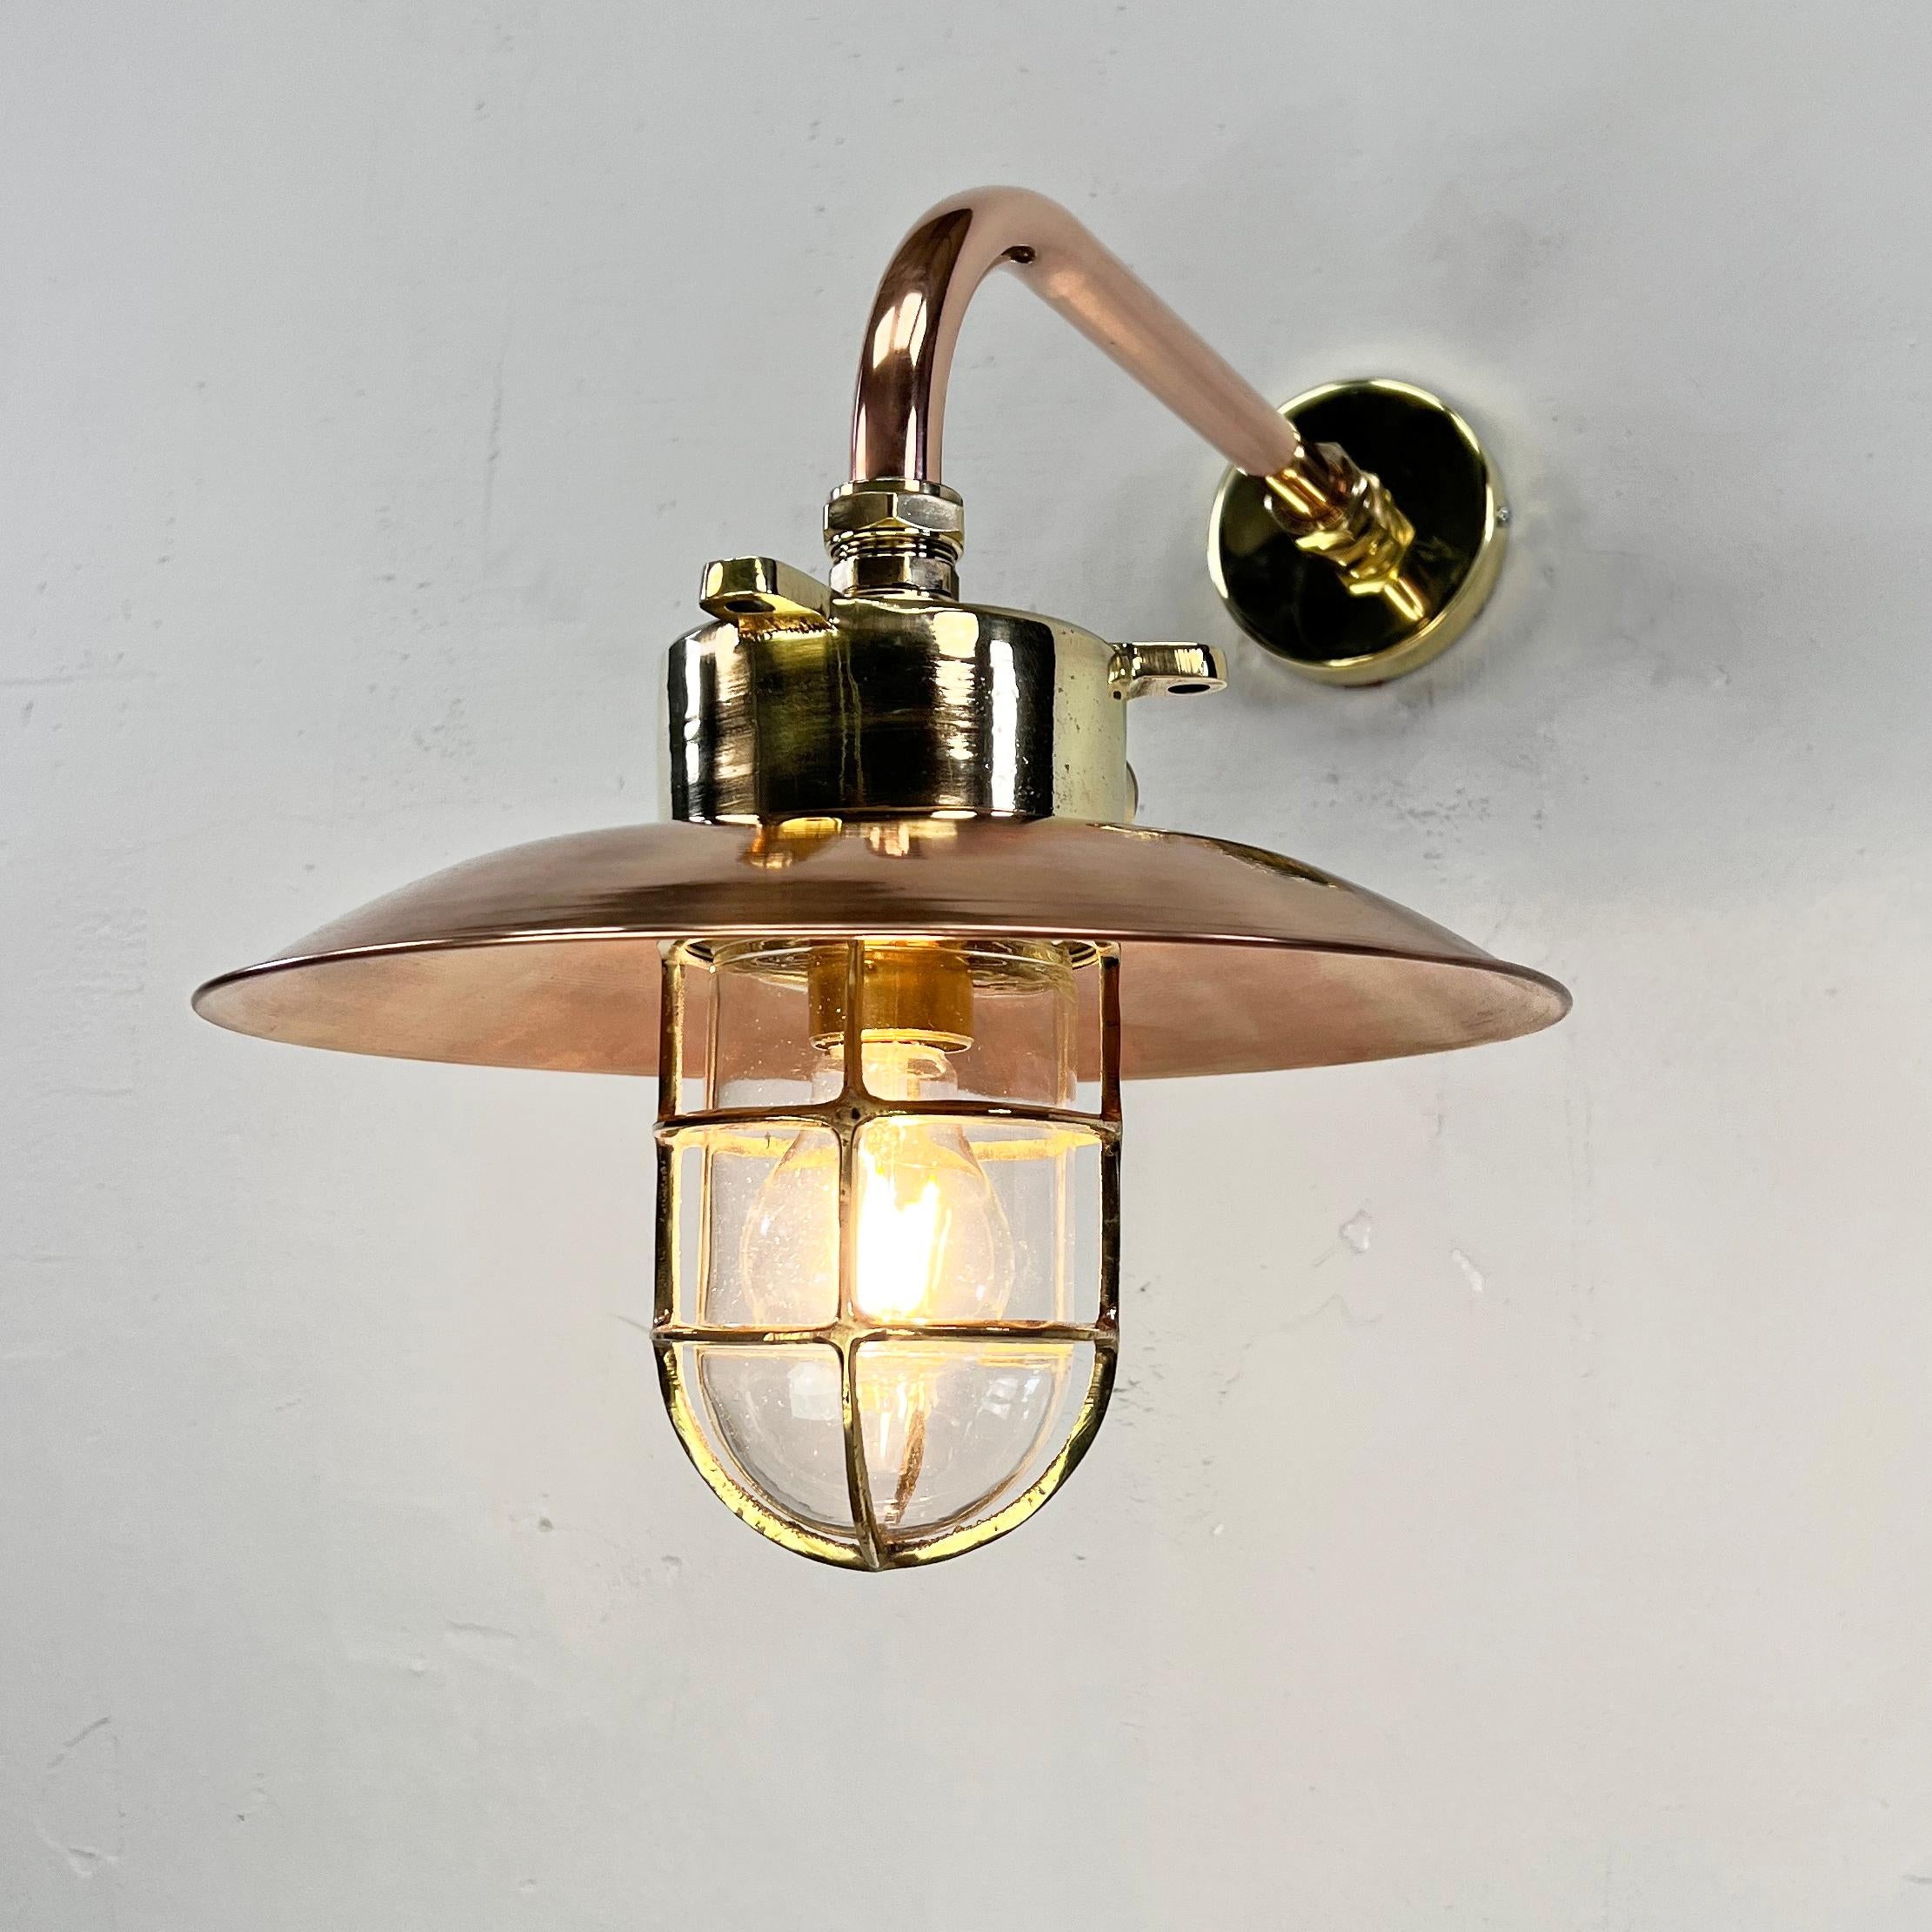 1970s Japanese Cast Brass and Copper Explosion Proof Caged Cantilever Wall Light For Sale 8